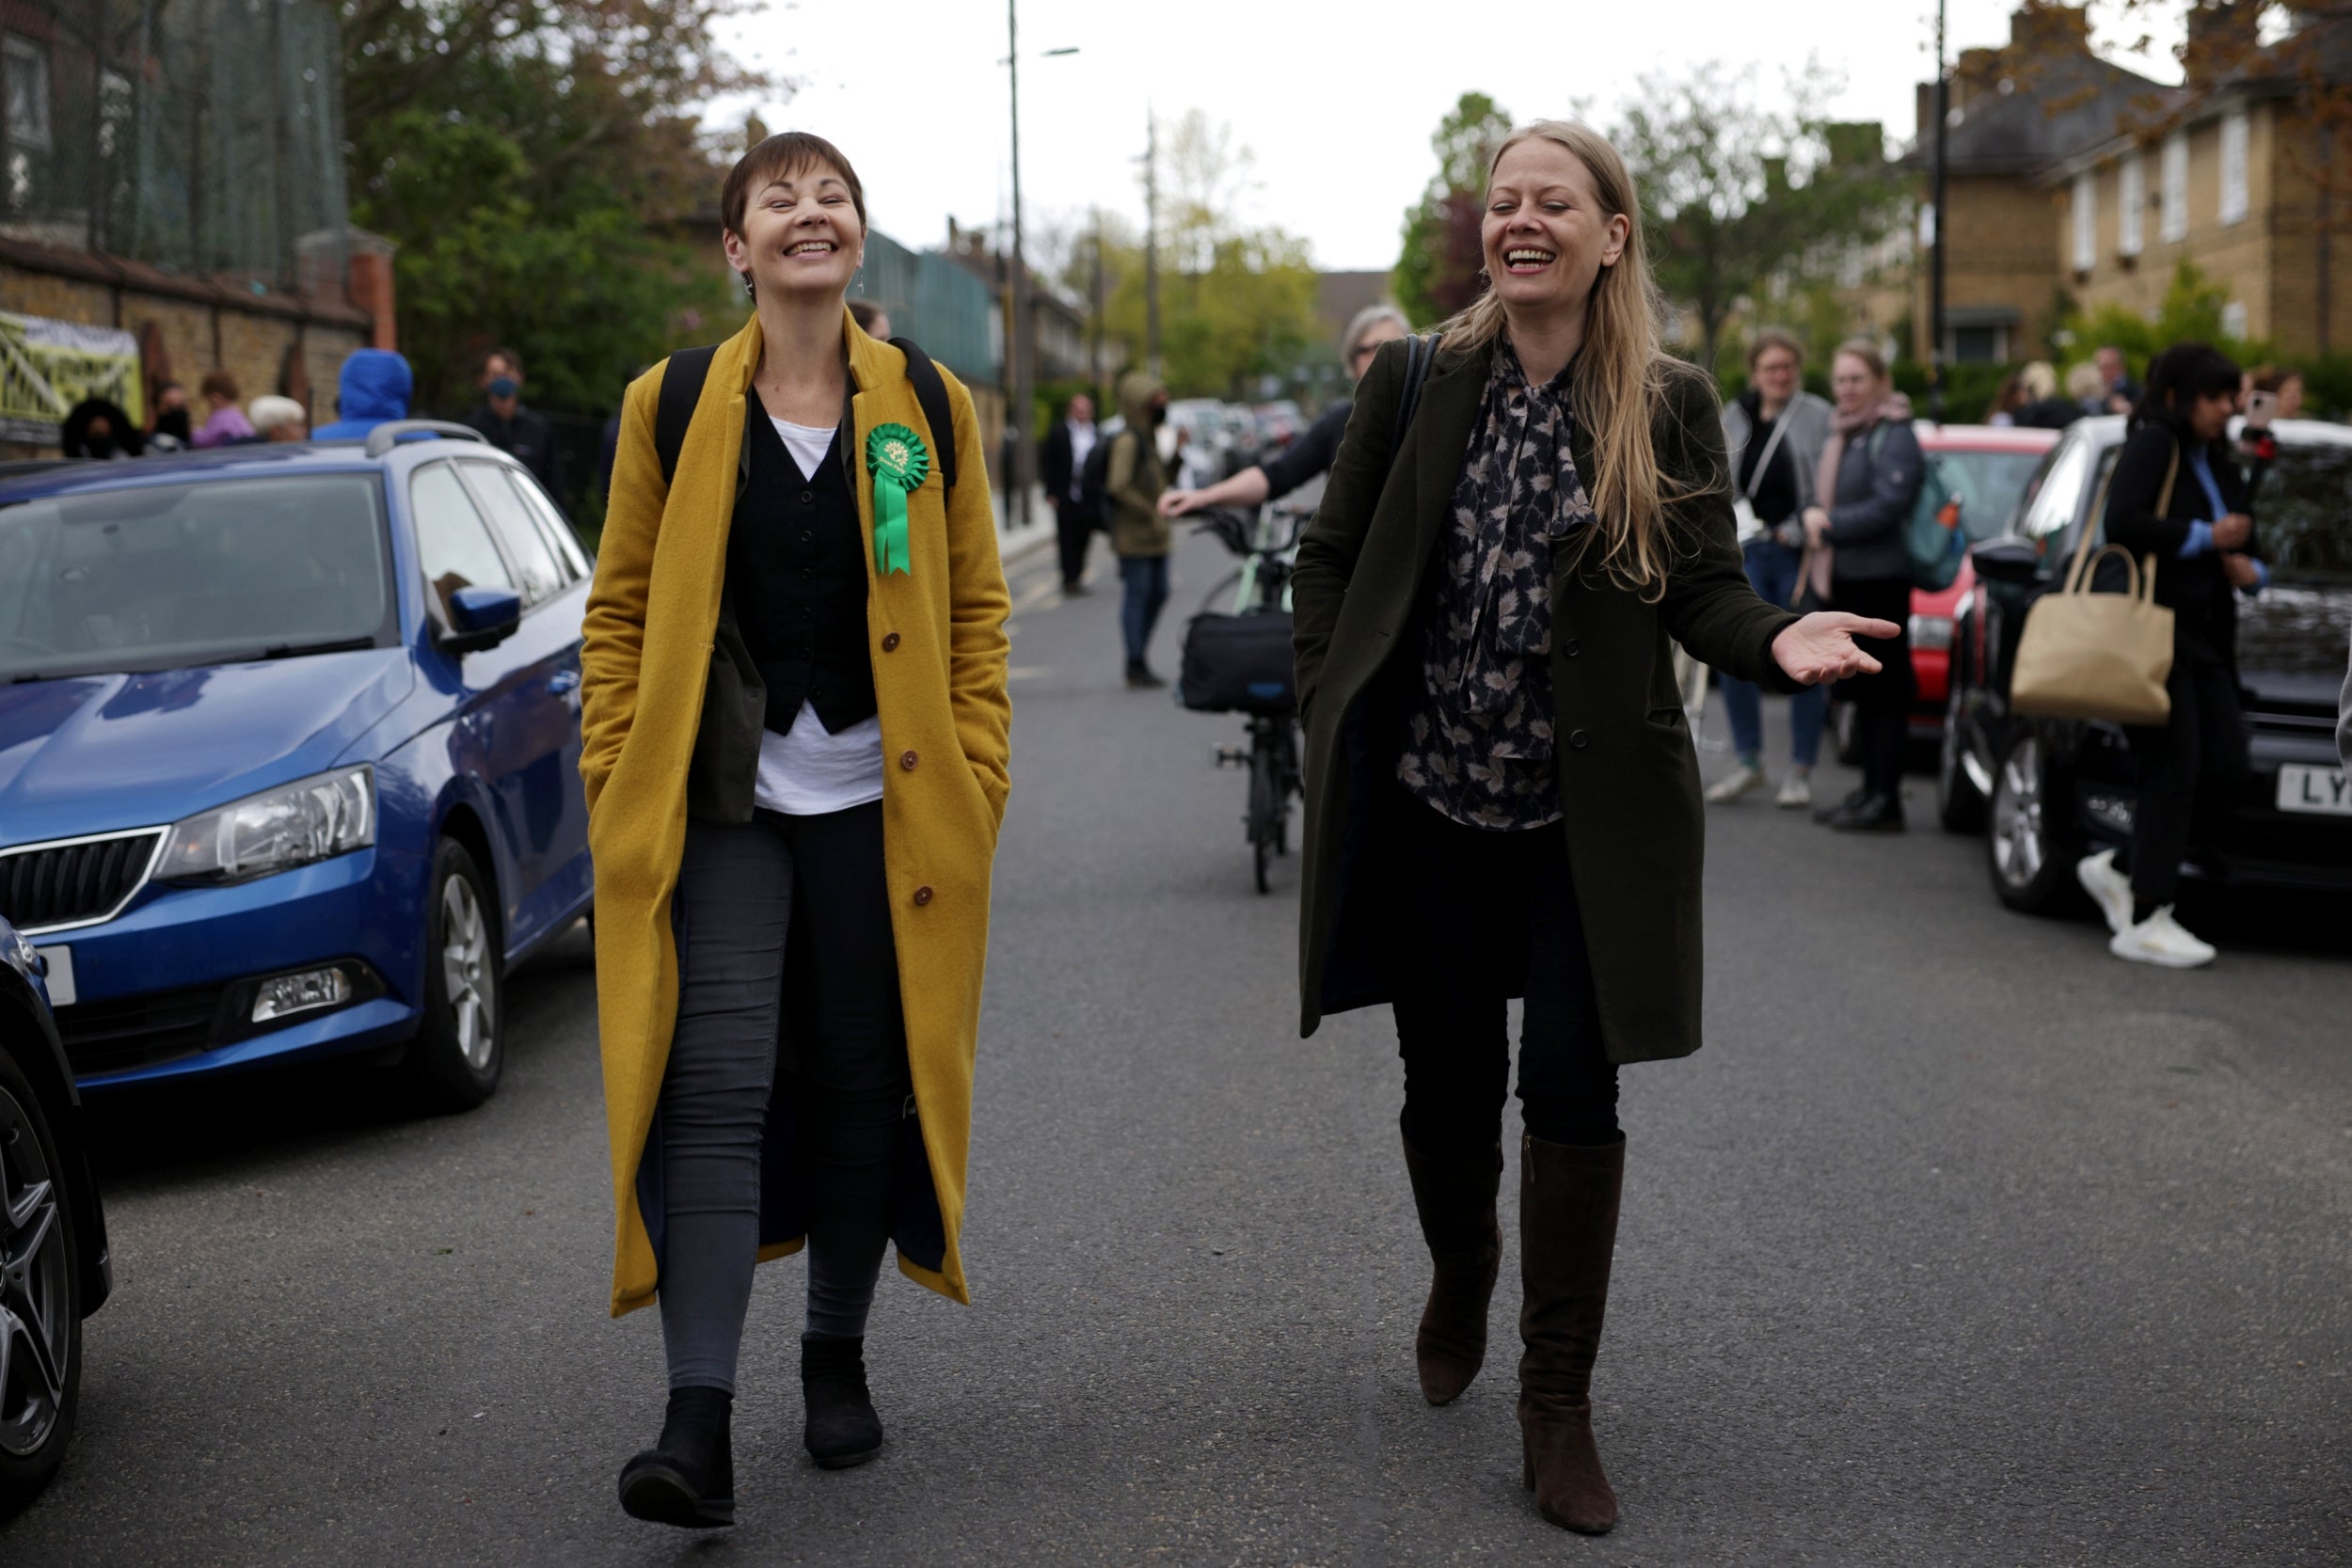 Sian Berry was Green Party co-leader from 2018 to 2021